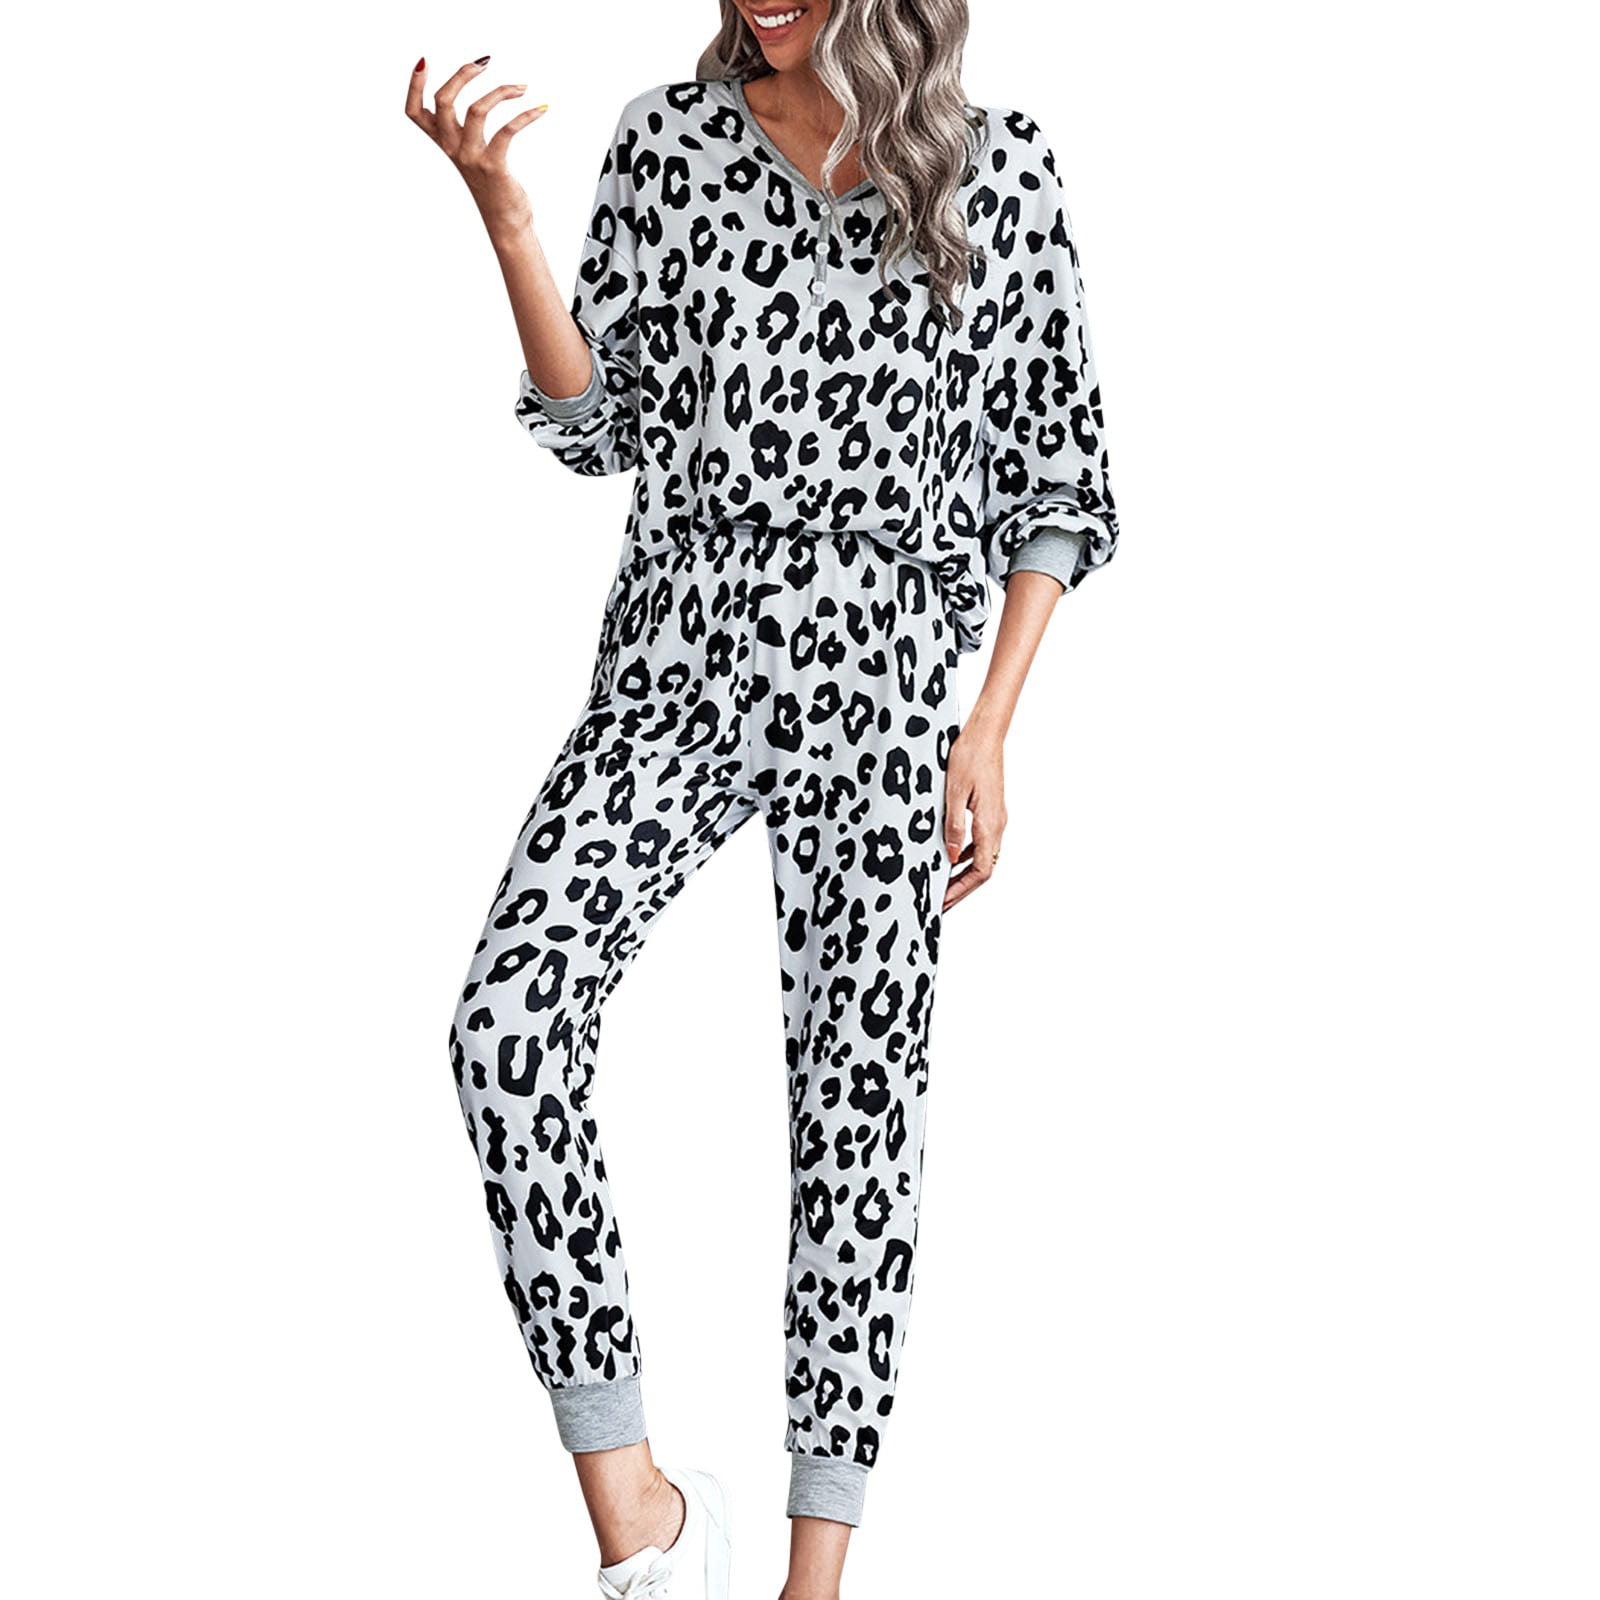 Woman's Snow Pants Fall Business Casual Outfits for Women Womens Long  Sleeve Pant Suit Leopard Print V Neck Cow Long Sleeve Suit Snow Pants Bib  Petite Women 